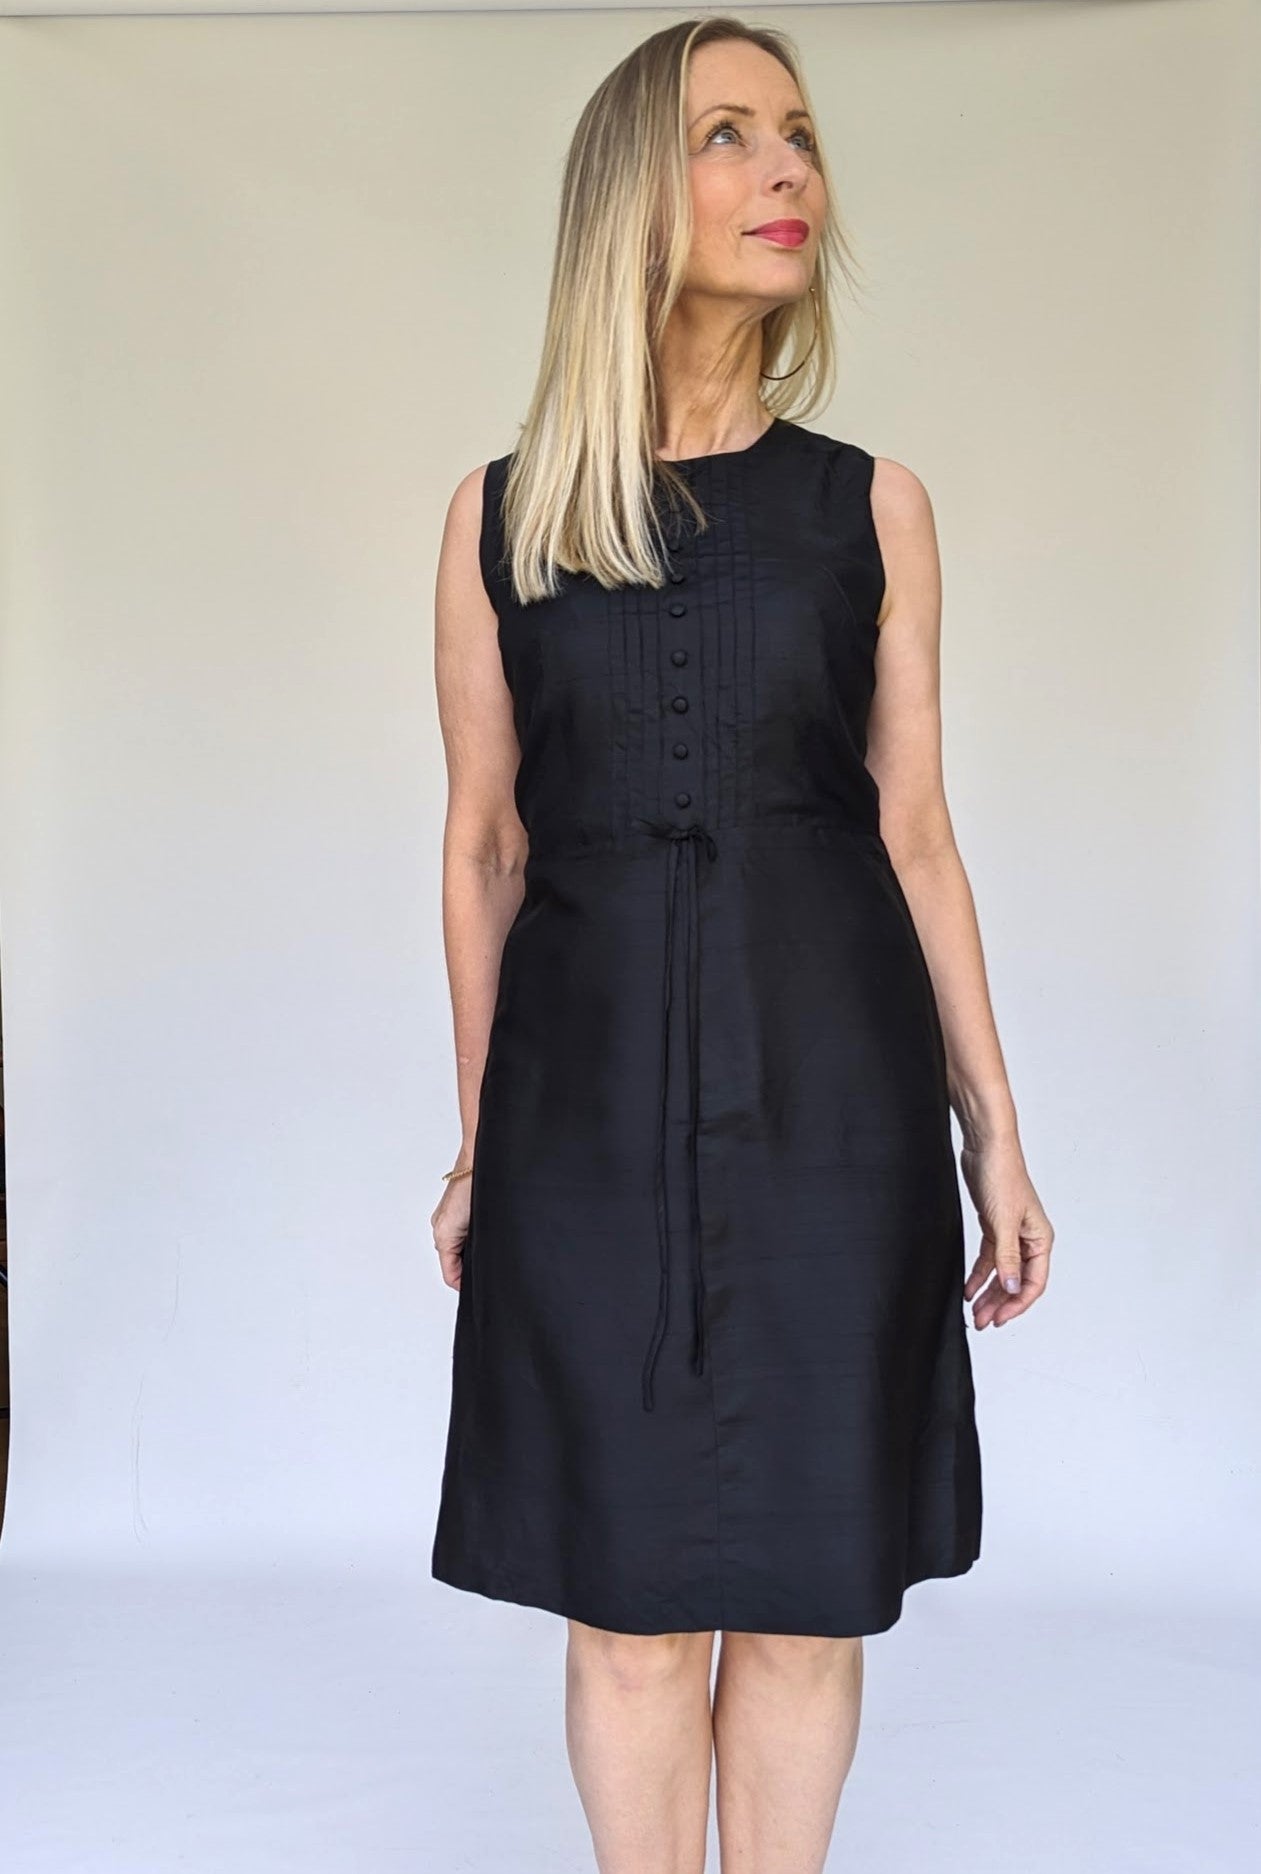 Vintage little black dress with bow